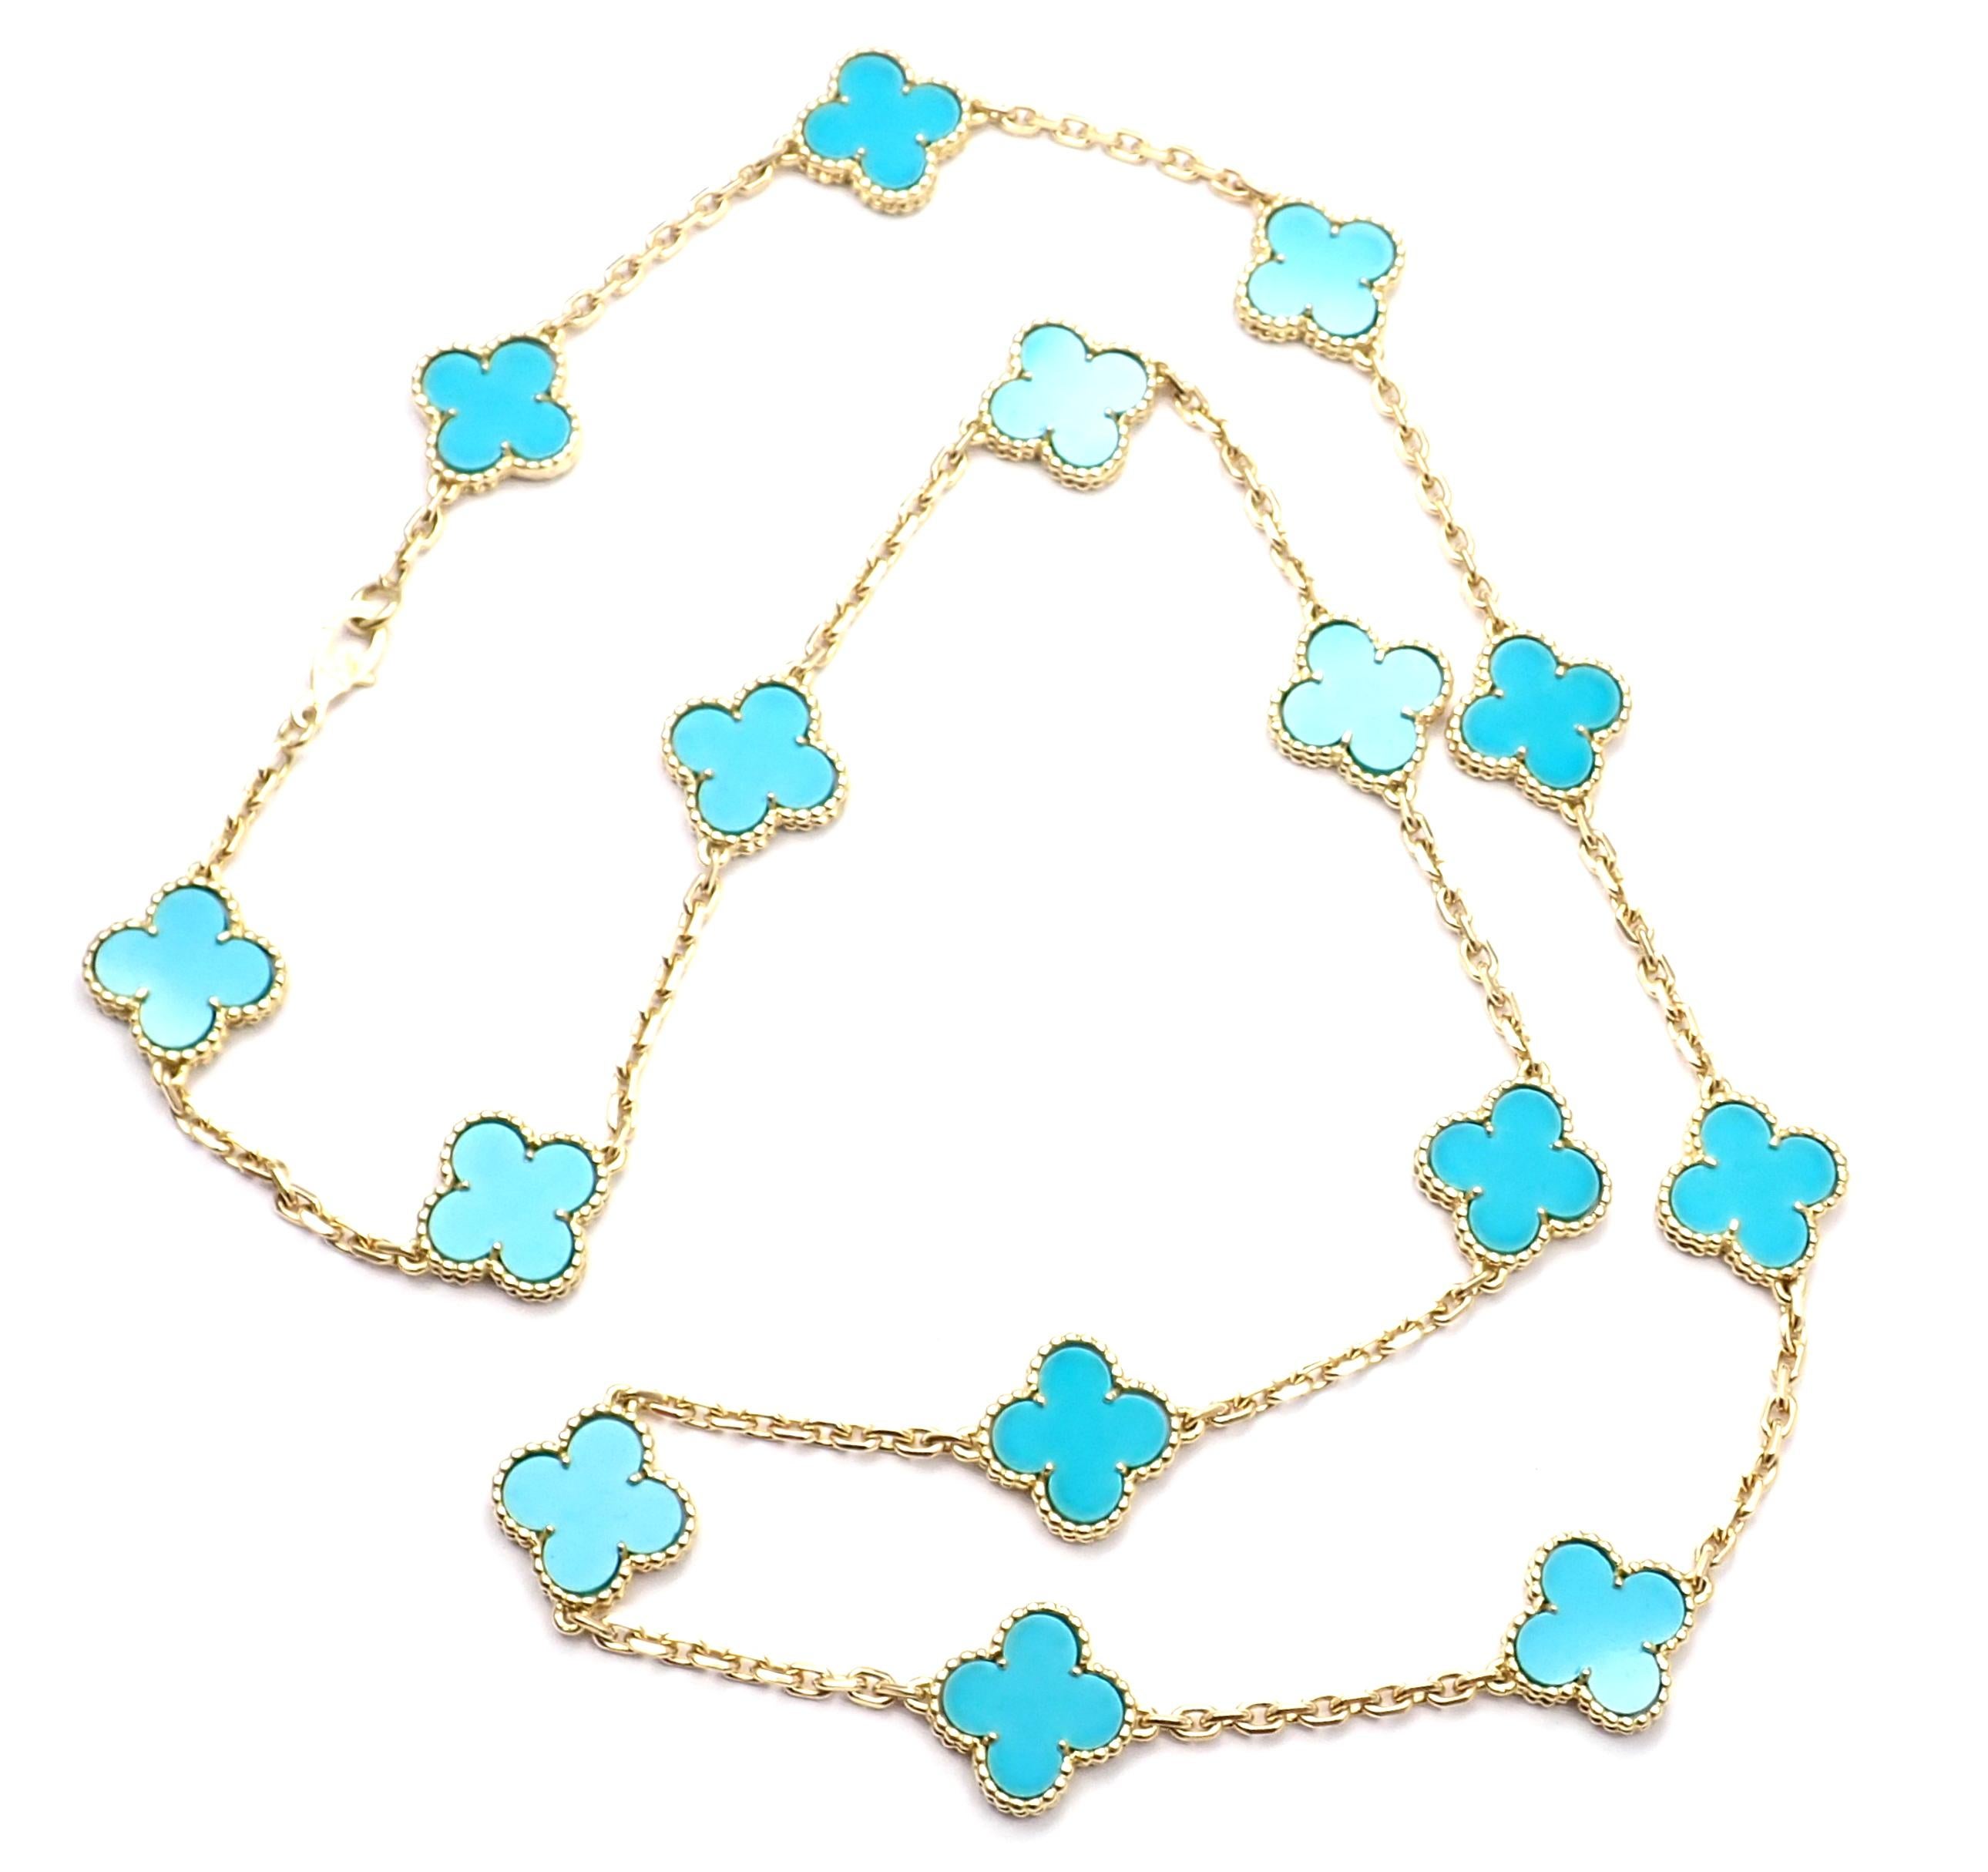 18k Yellow Gold Alhambra 15 Motifs Turquoise Necklace by Van Cleef & Arpels. 
This necklace comes with a Van Cleef & Arpels service paper from VCA store and a box.
With 15 motifs of turquoise alhambra stones 15mm each
Details: 
Length: 24.5